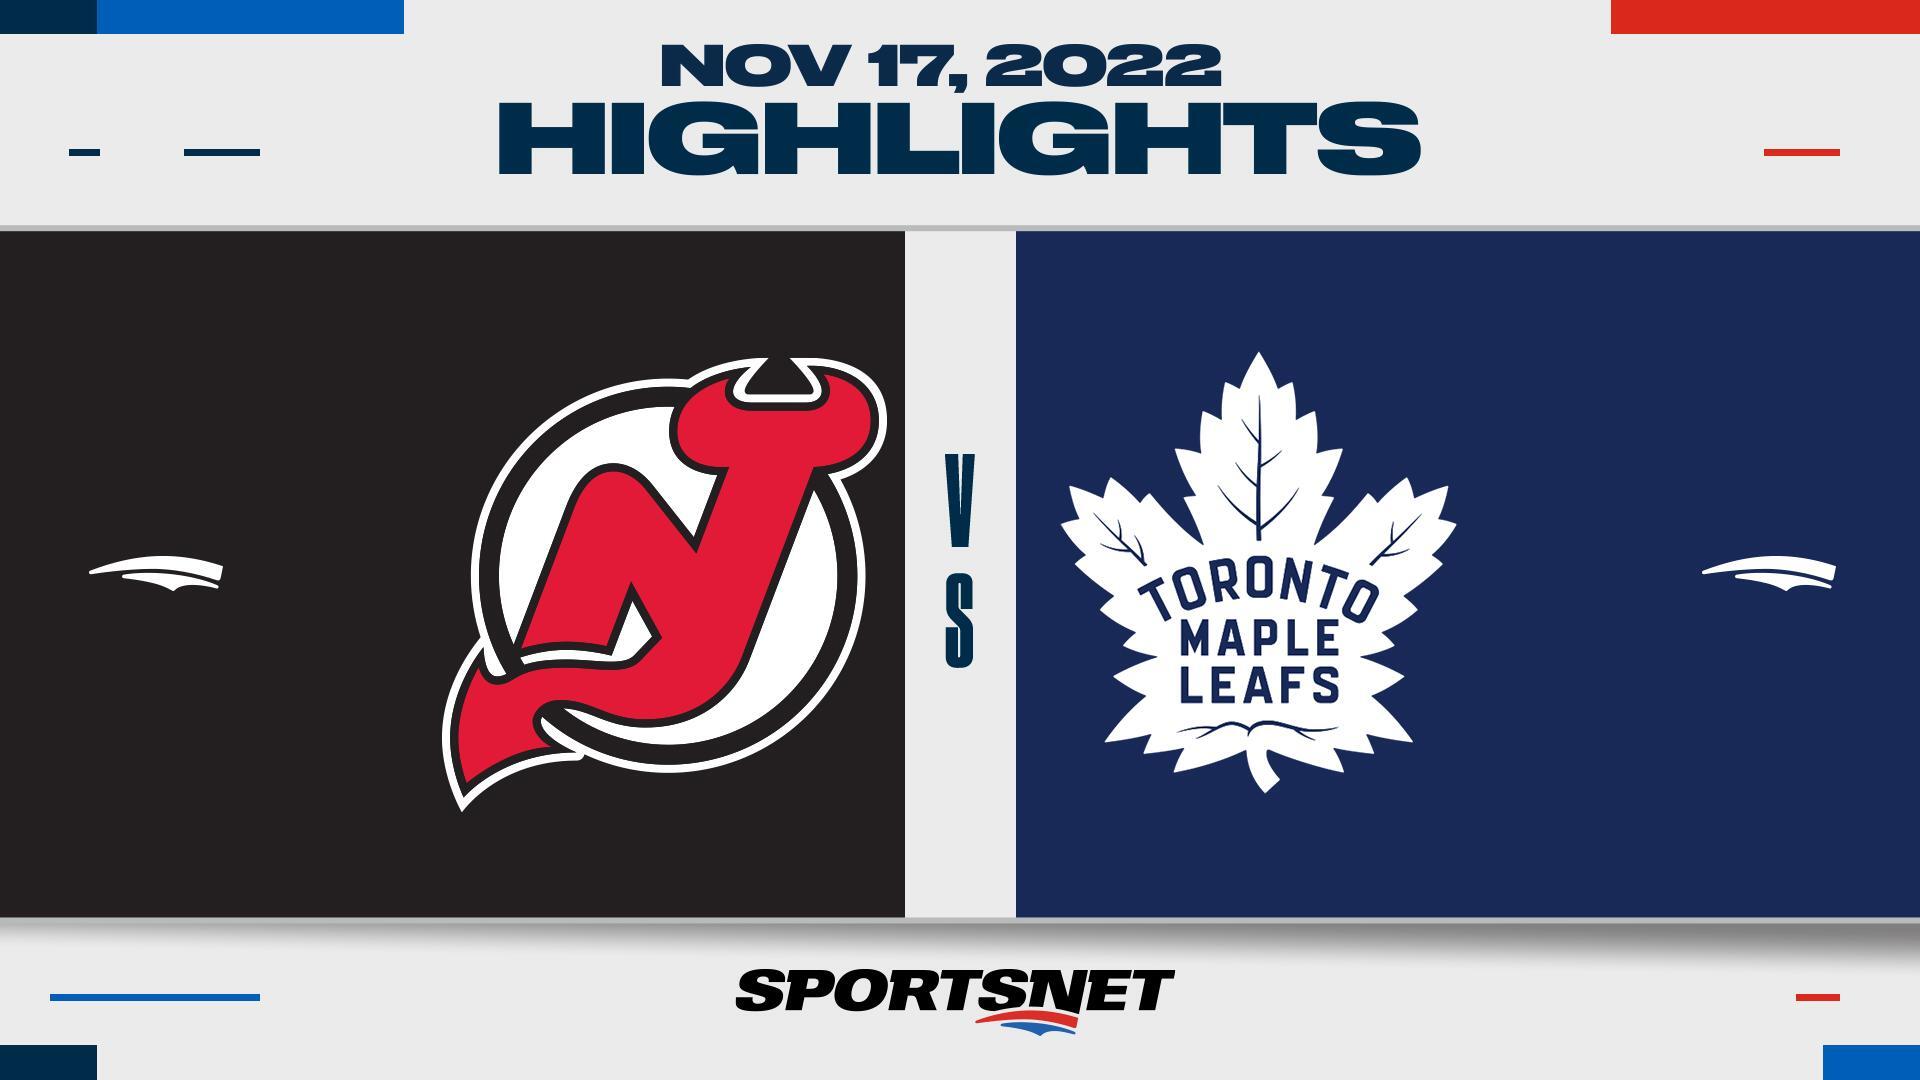 Devils down Leafs in OT for 11th consecutive win - The Rink Live   Comprehensive coverage of youth, junior, high school and college hockey